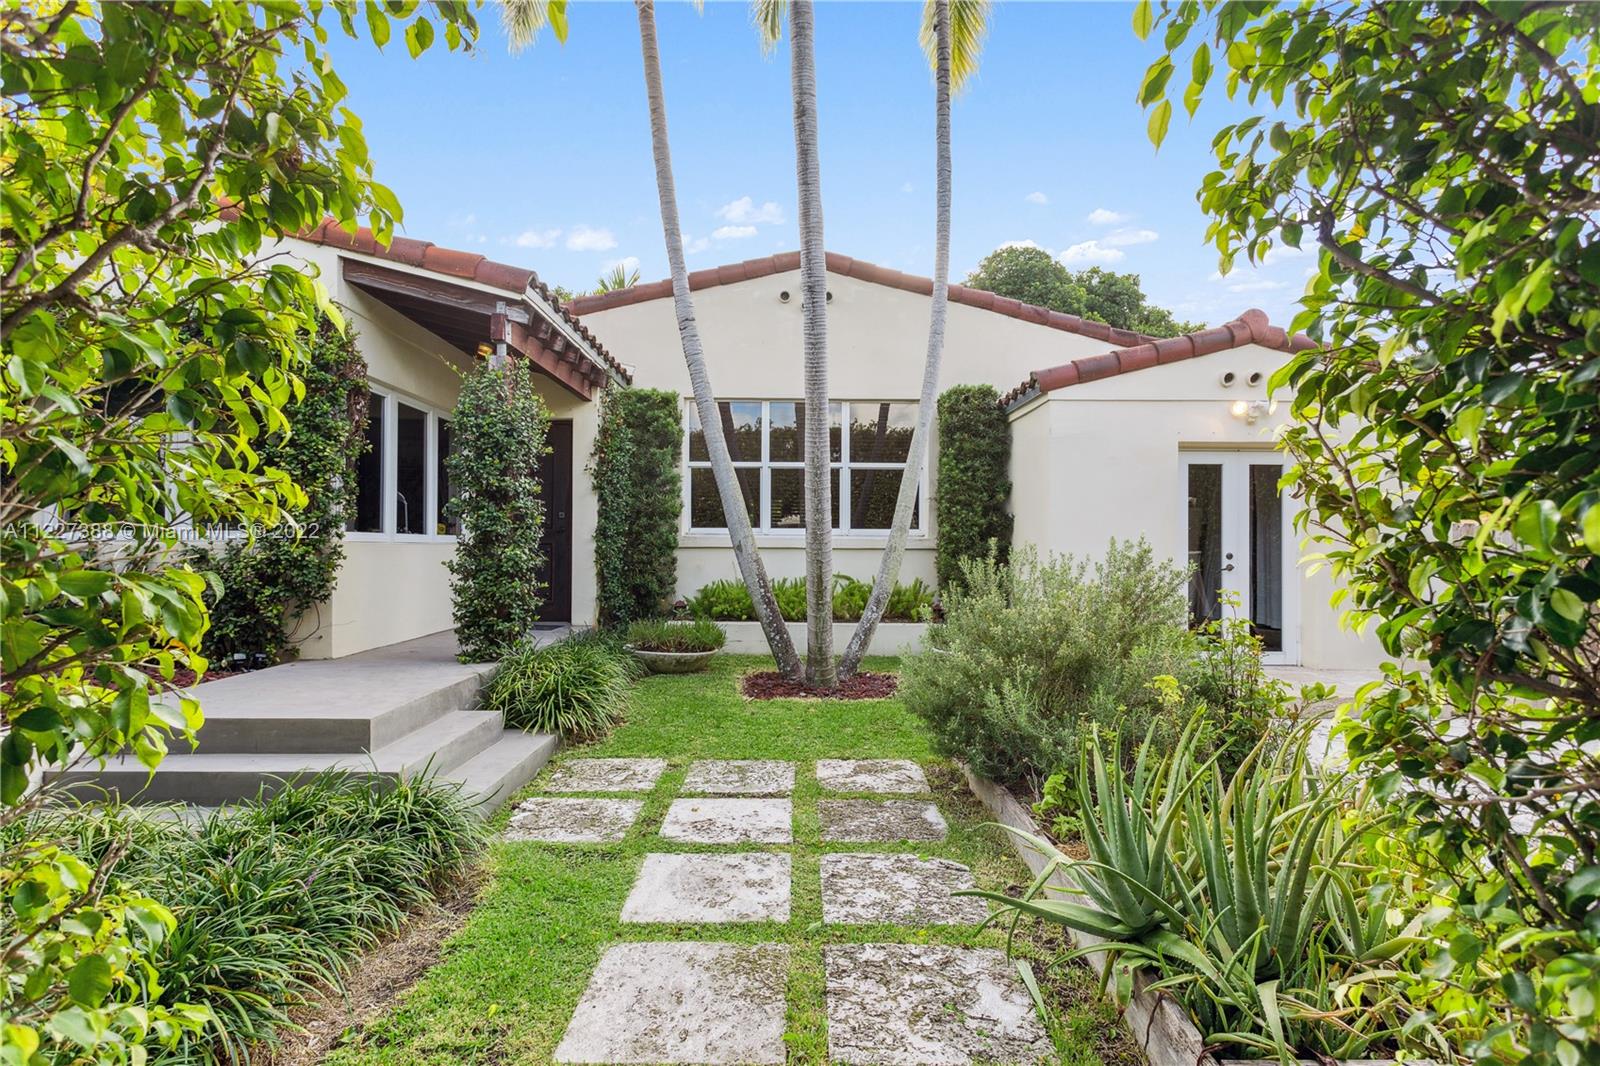 Exquisite Spanish style home in quiet and desirable Post Ave, in the heart of Miami Beach. Beautiful wood vaulted ceiling, open kitchen, wood floors, and split-floorpan providing privacy and functionality. Very bright 3 bedroom plus den with a magical backyard boasting a large pool and a flower filled cedar Pergola to dine under. Temperature controlled wine room with space for 72 bottles, gas generator. Very private with 13' tall Ficus surrounding the perimeter of the house. The mud room and the original details along with the modern feel and original crown moldings, make of this home a true gem and quintessential Miami Beach. SEE BROKER REMARKS!!